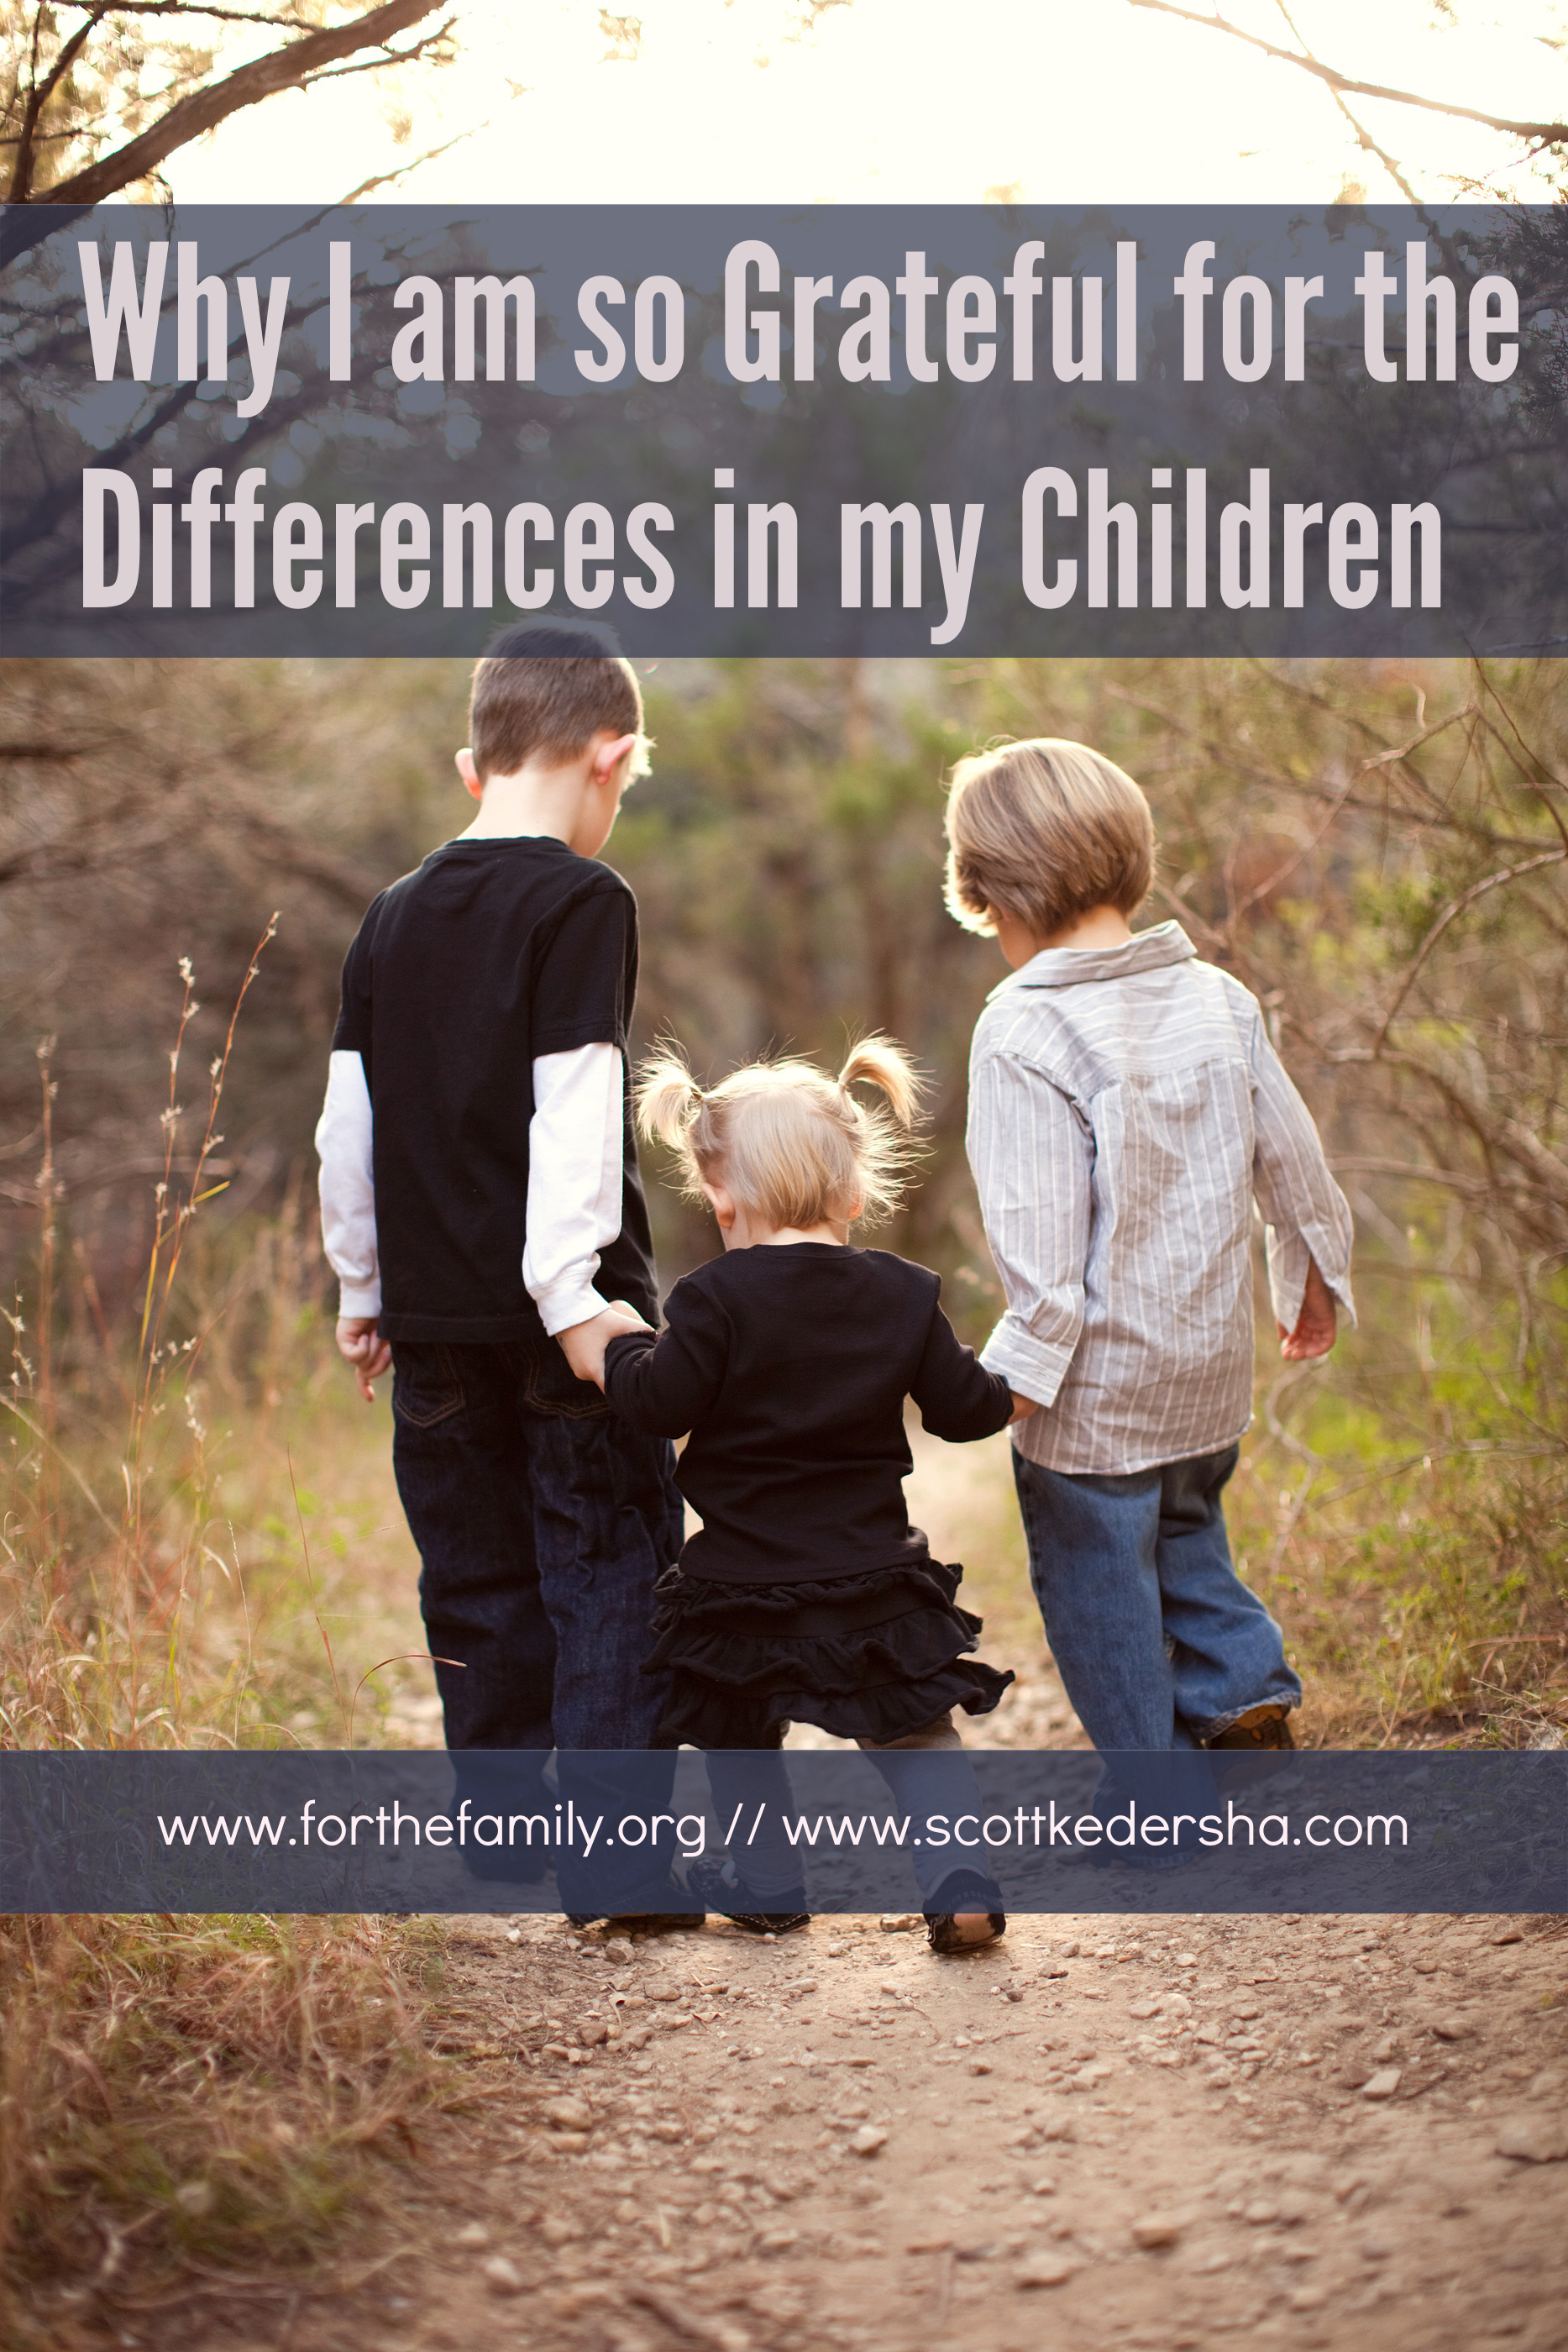 Why I am so Grateful for the Differences in my Children